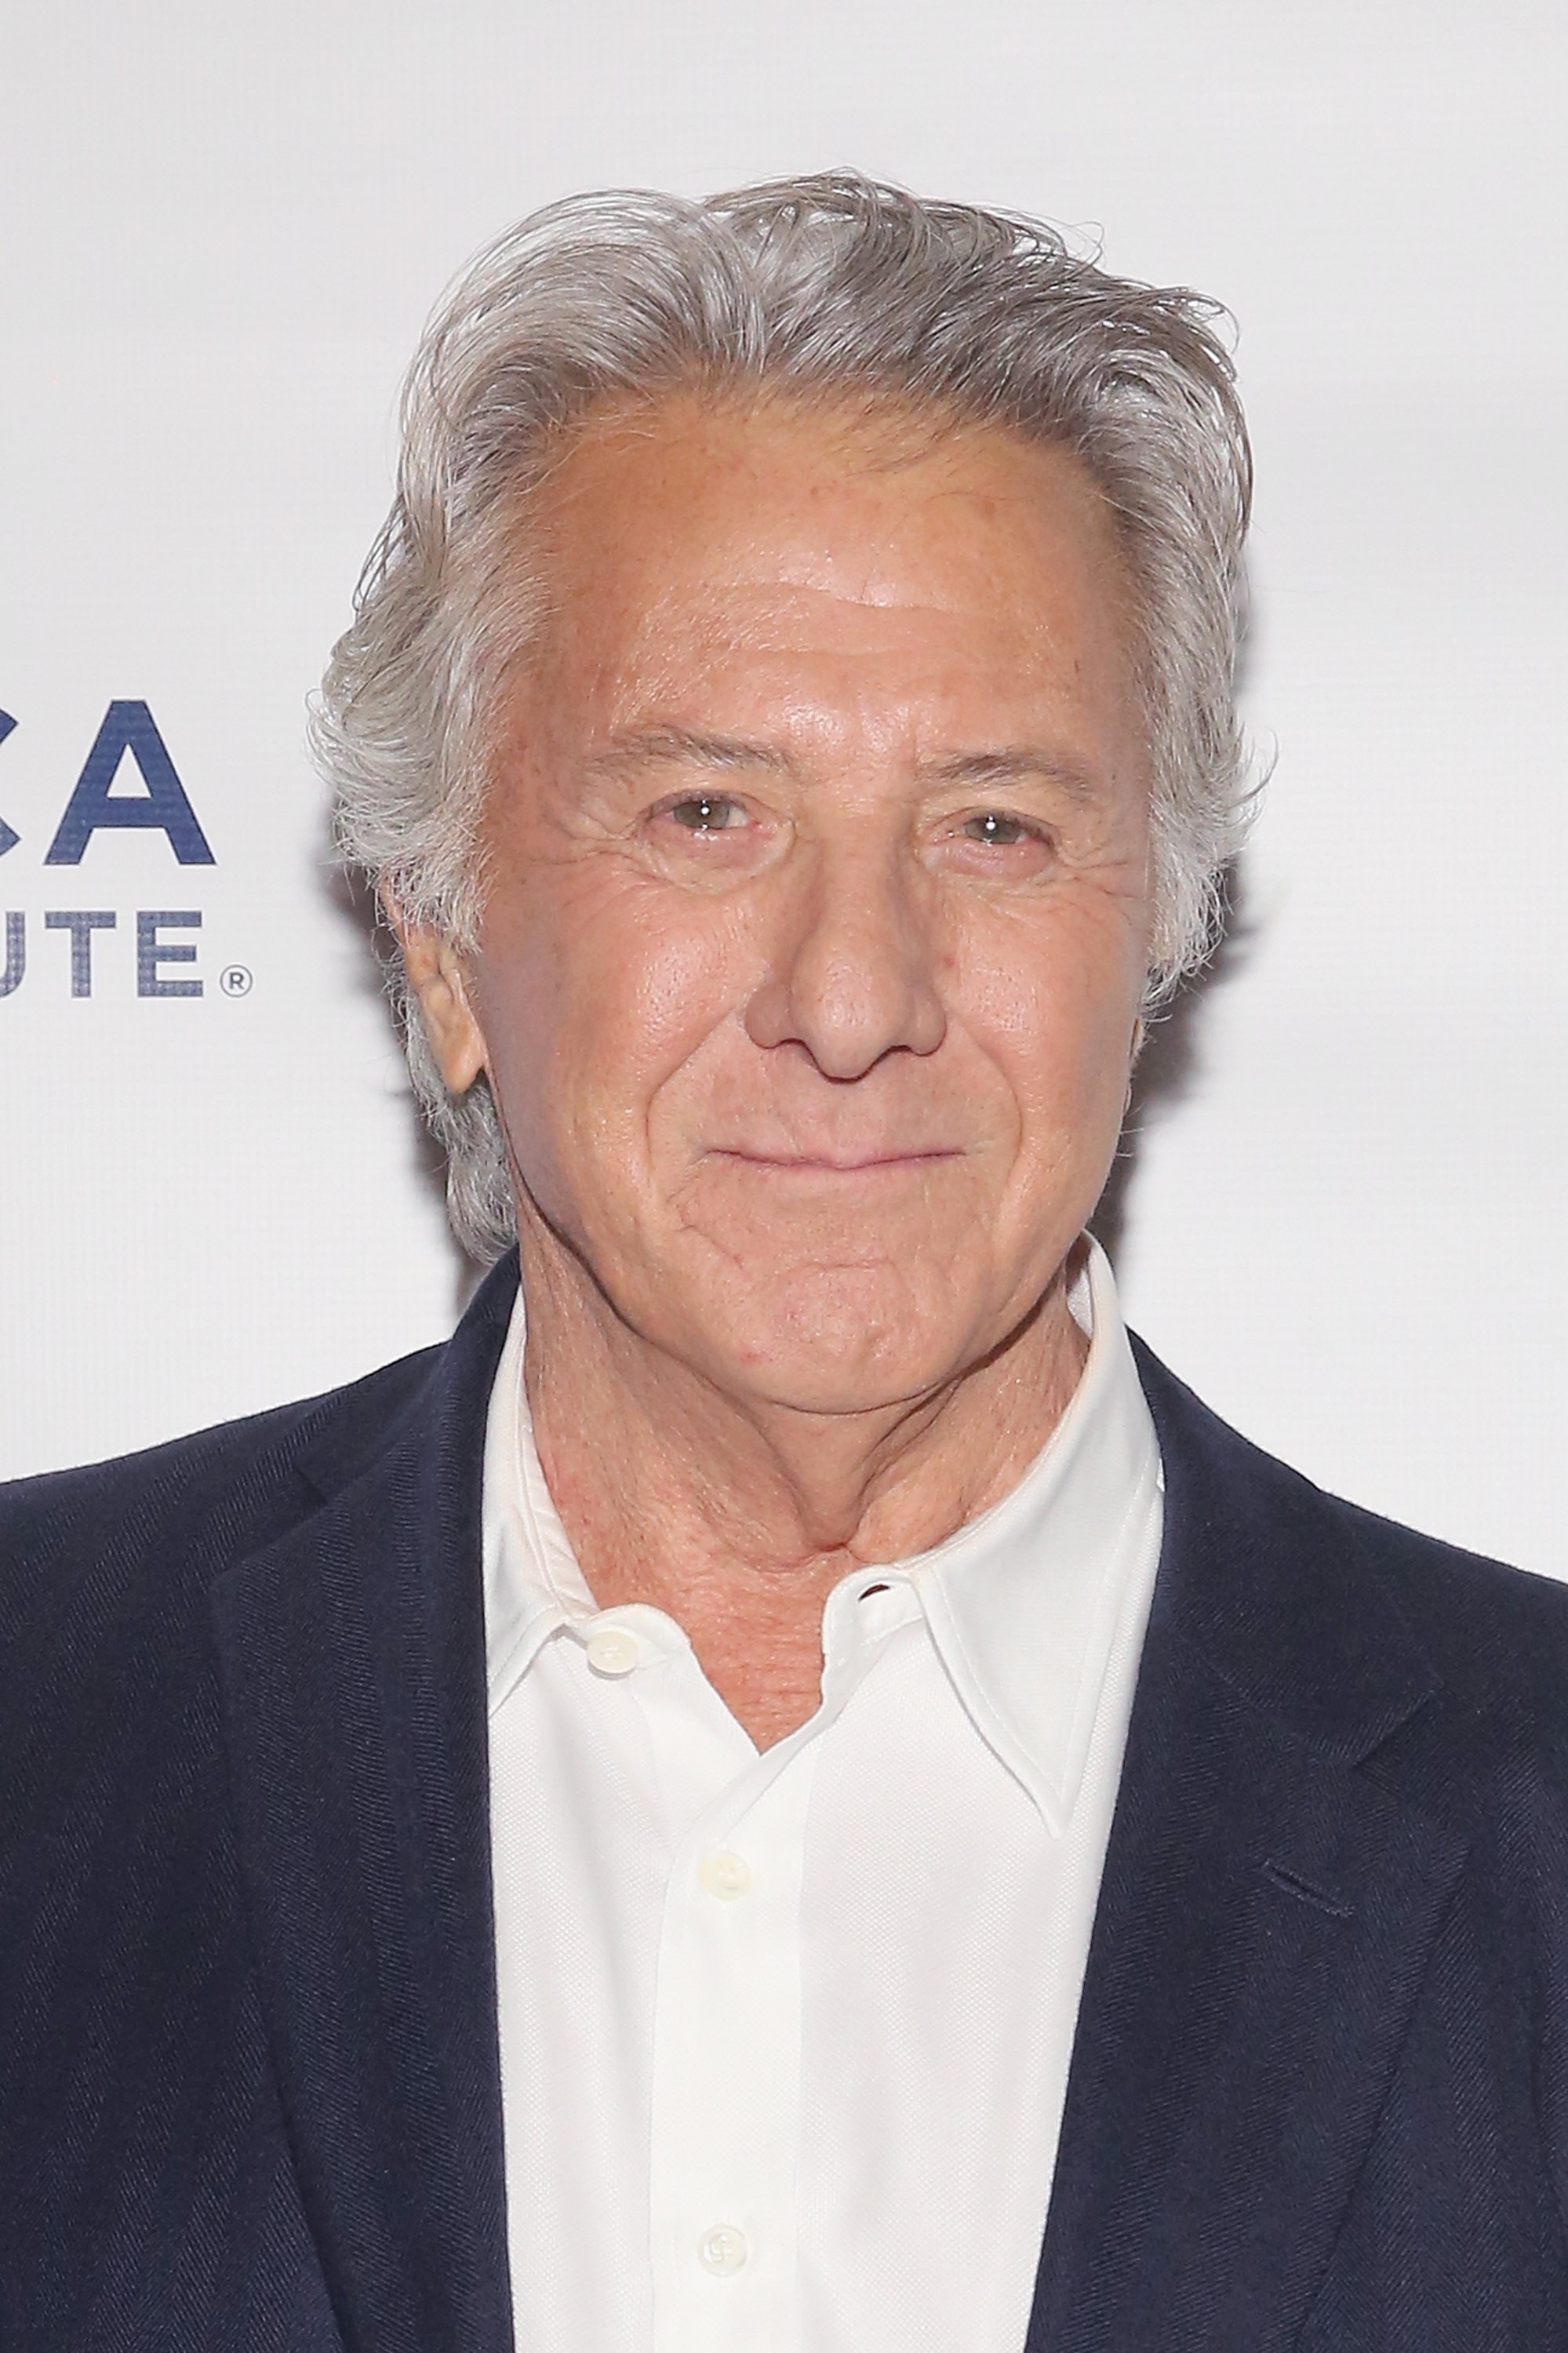 Actor Dustin Hoffman attends the 20th Anniversary screening of "Wag The Dog" at 92nd Street Y on December 4, 2017 in New York City | Source: Getty Images